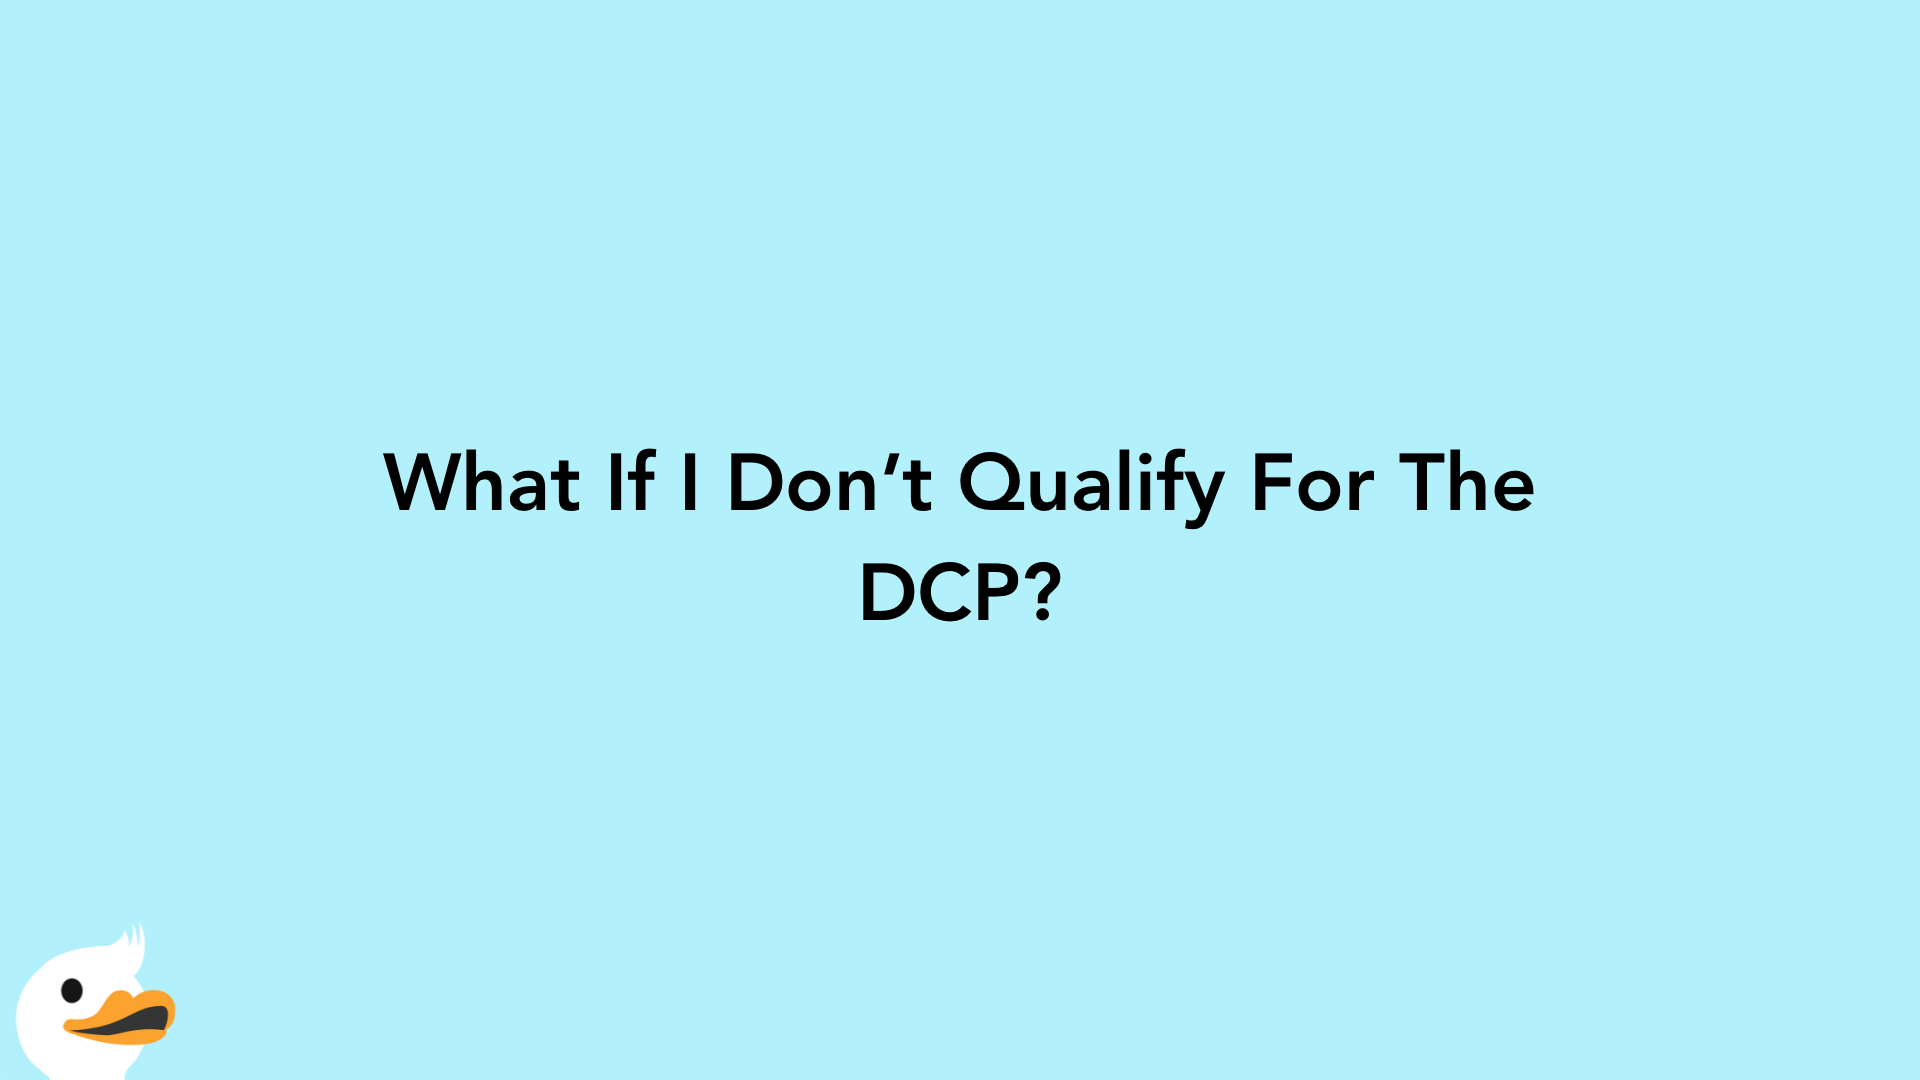 What If I Don’t Qualify For The DCP?